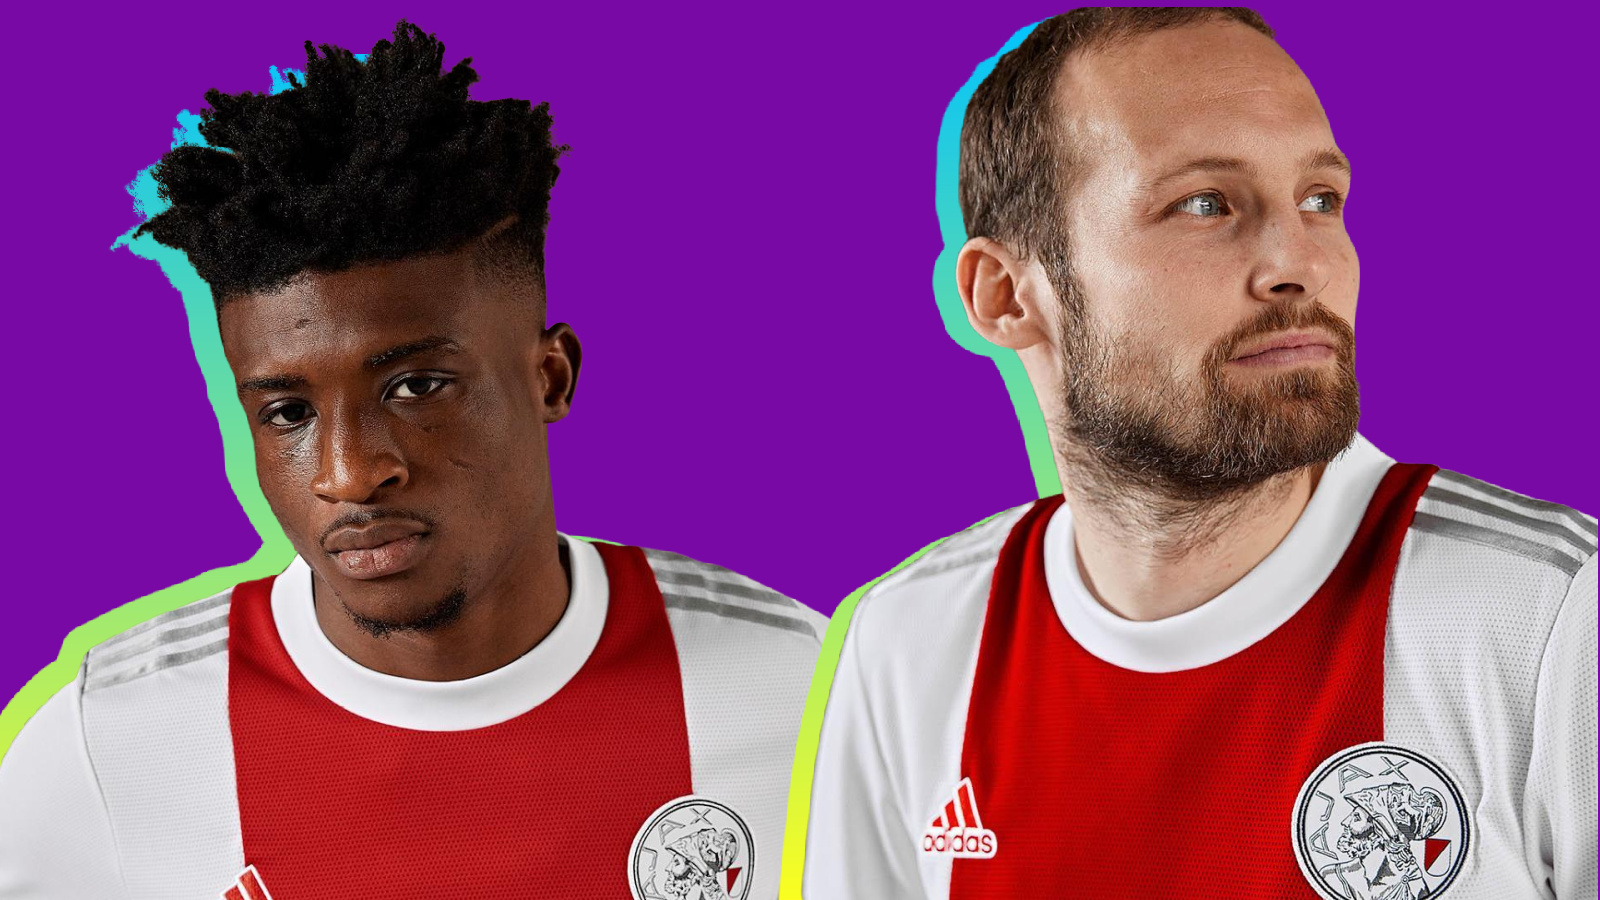 Ajax bring back old logo in a retro-style 21/22 home kit